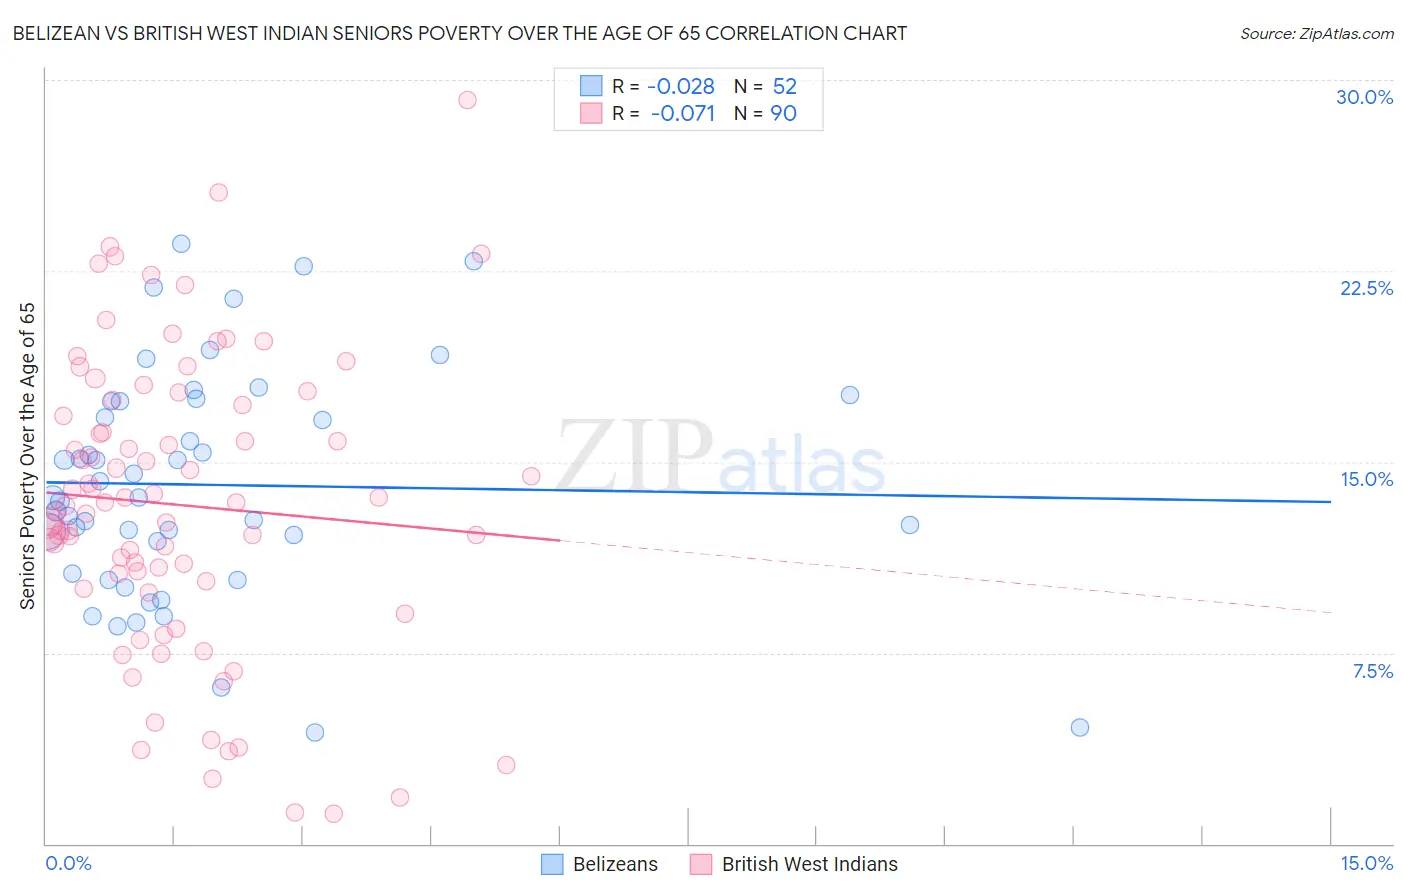 Belizean vs British West Indian Seniors Poverty Over the Age of 65